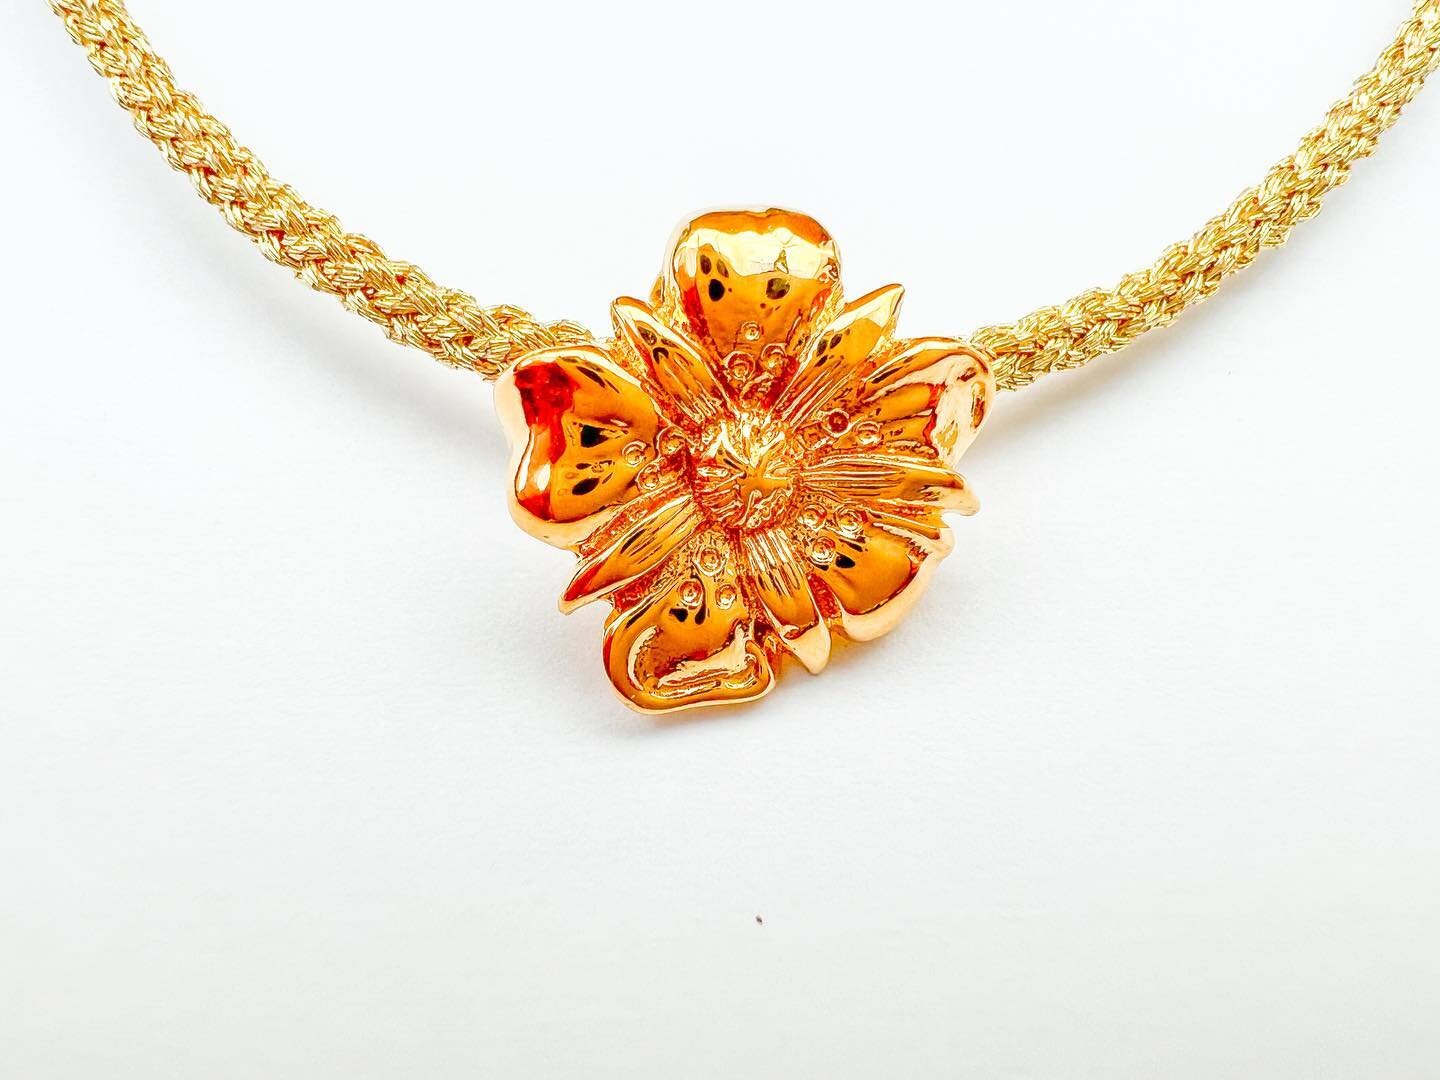 Strawberry flower necklace in gold plated or 9 carat gold with handwoven gold thread. Originally hand-carved in wax (swipe to see wax work), you can see the trace of my hand in every jewel. Order yours now at www.josephinedestael.com #jewellery #lost